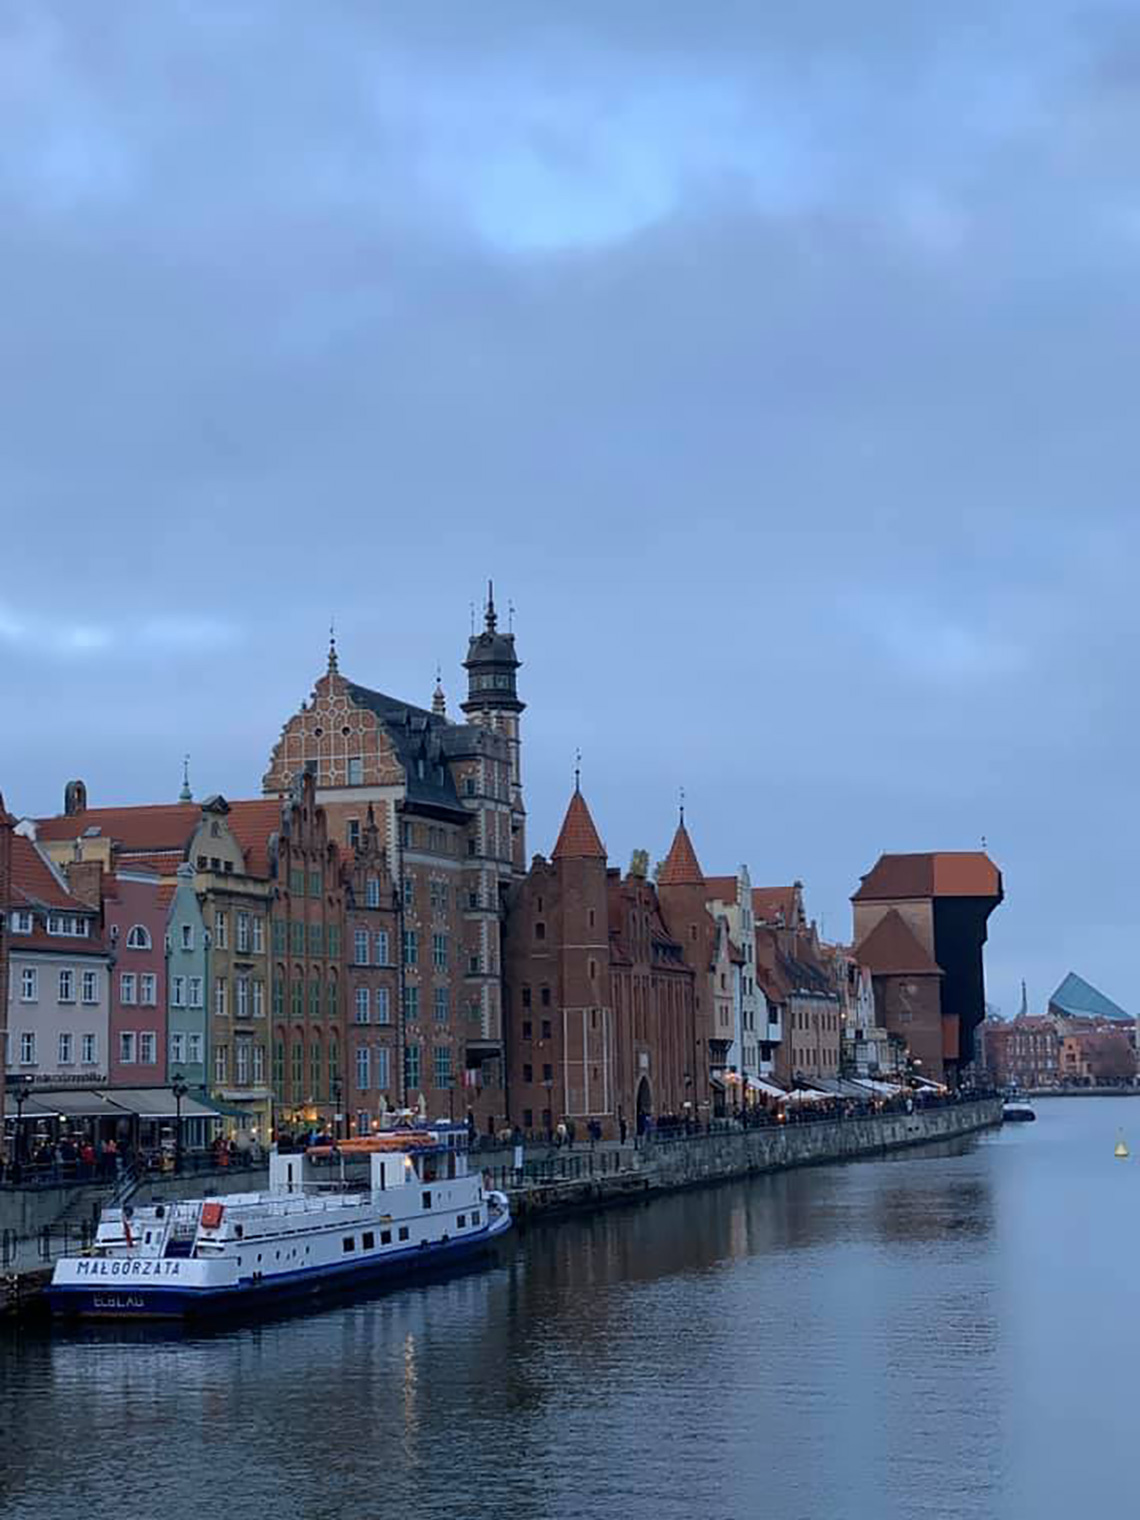 View of Gdansk from the river